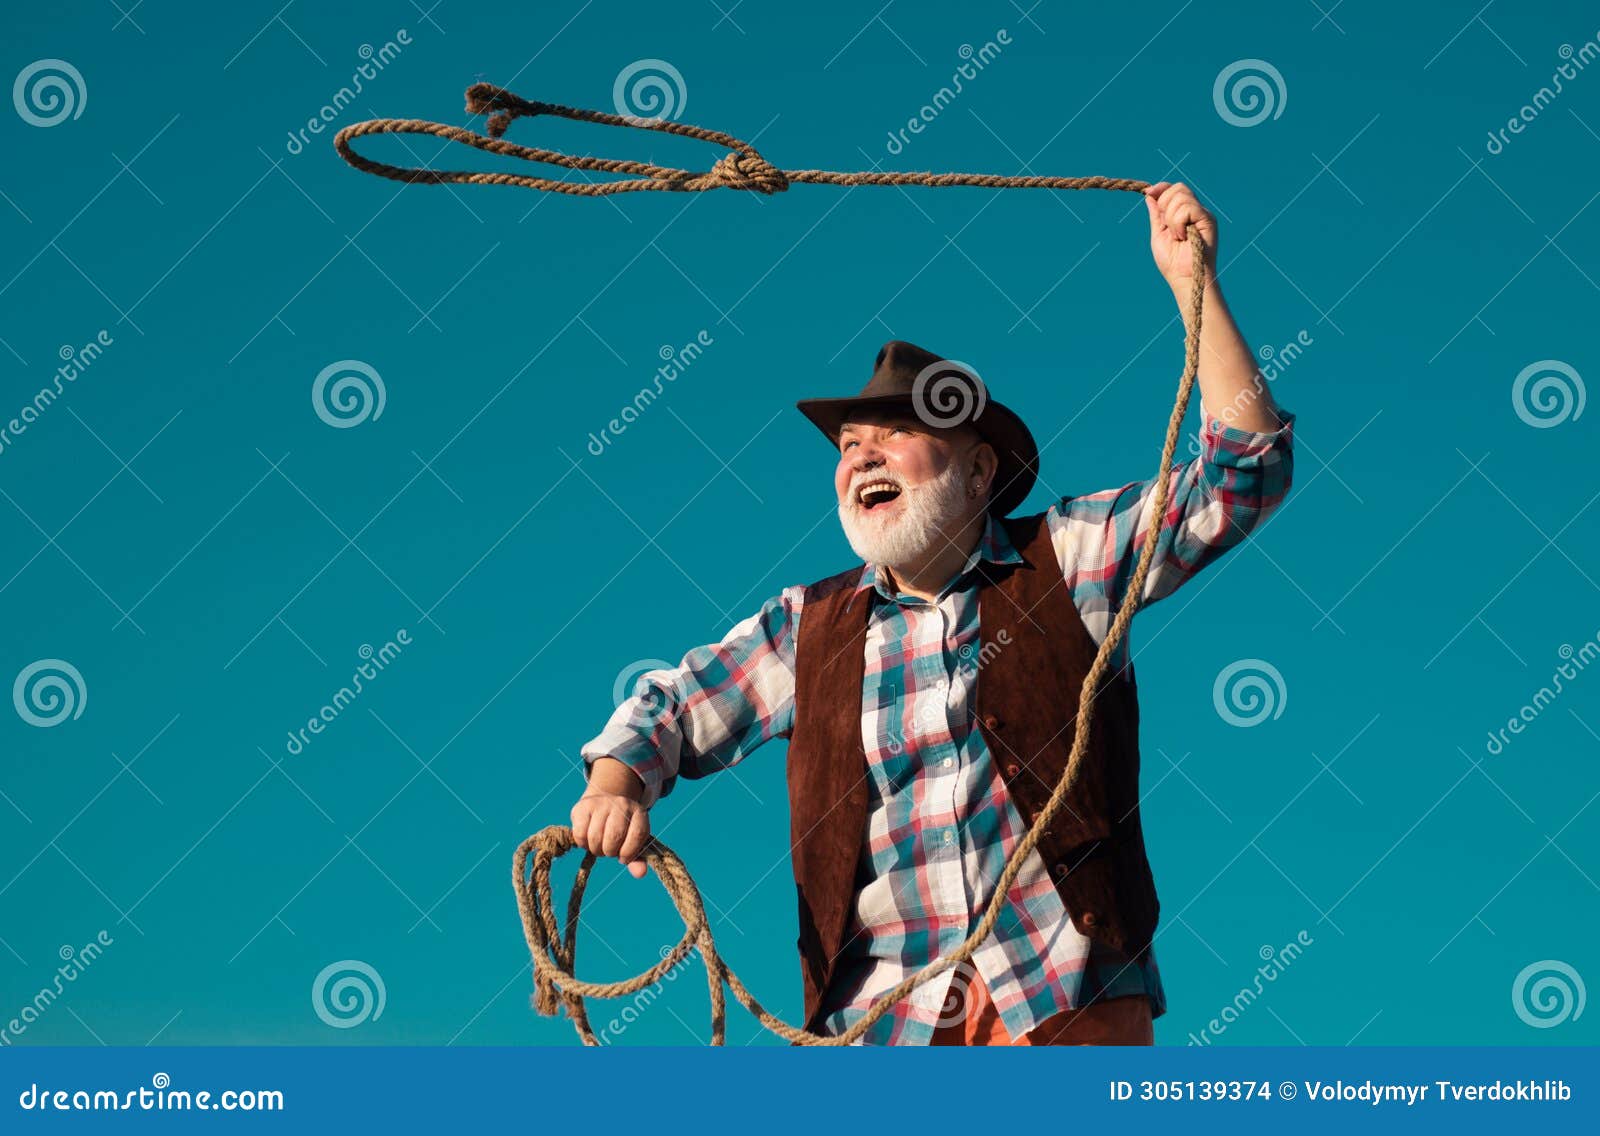 Old Wild West Cowboy with Rope. Bearded Western Man Throwing Lasso